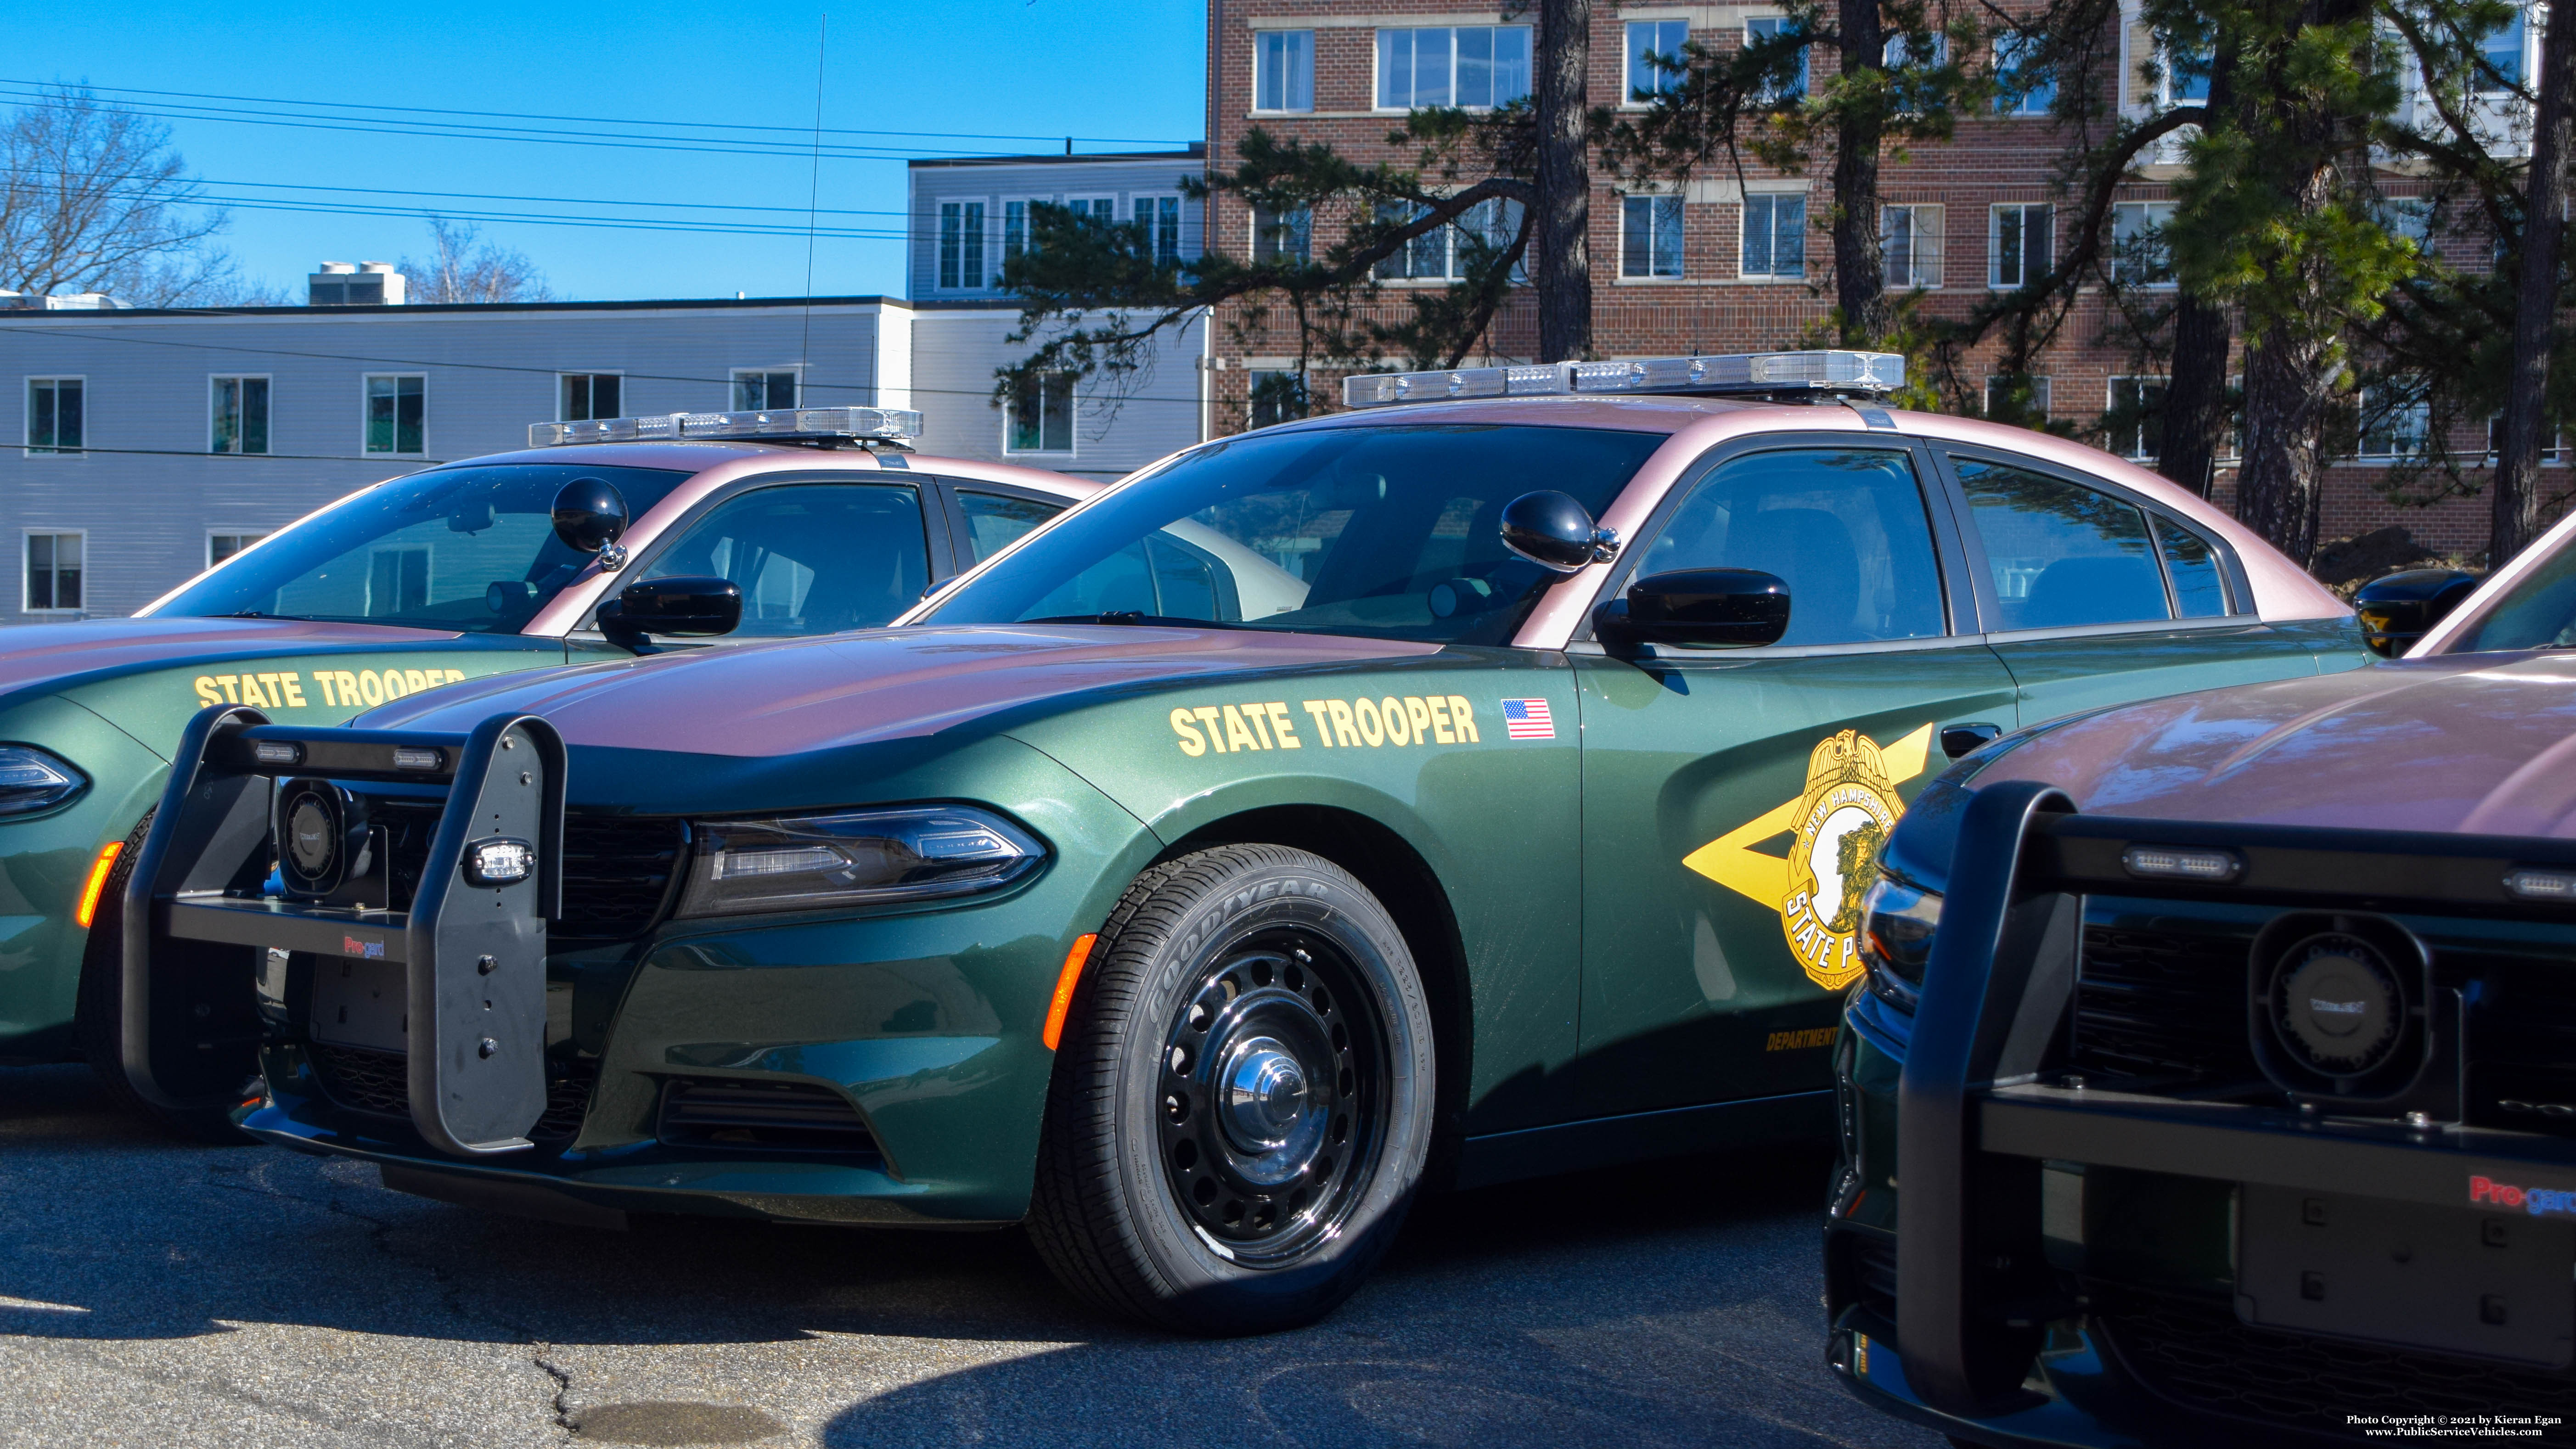 A photo  of New Hampshire State Police
            Cruiser 515, a 2020 Dodge Charger             taken by Kieran Egan